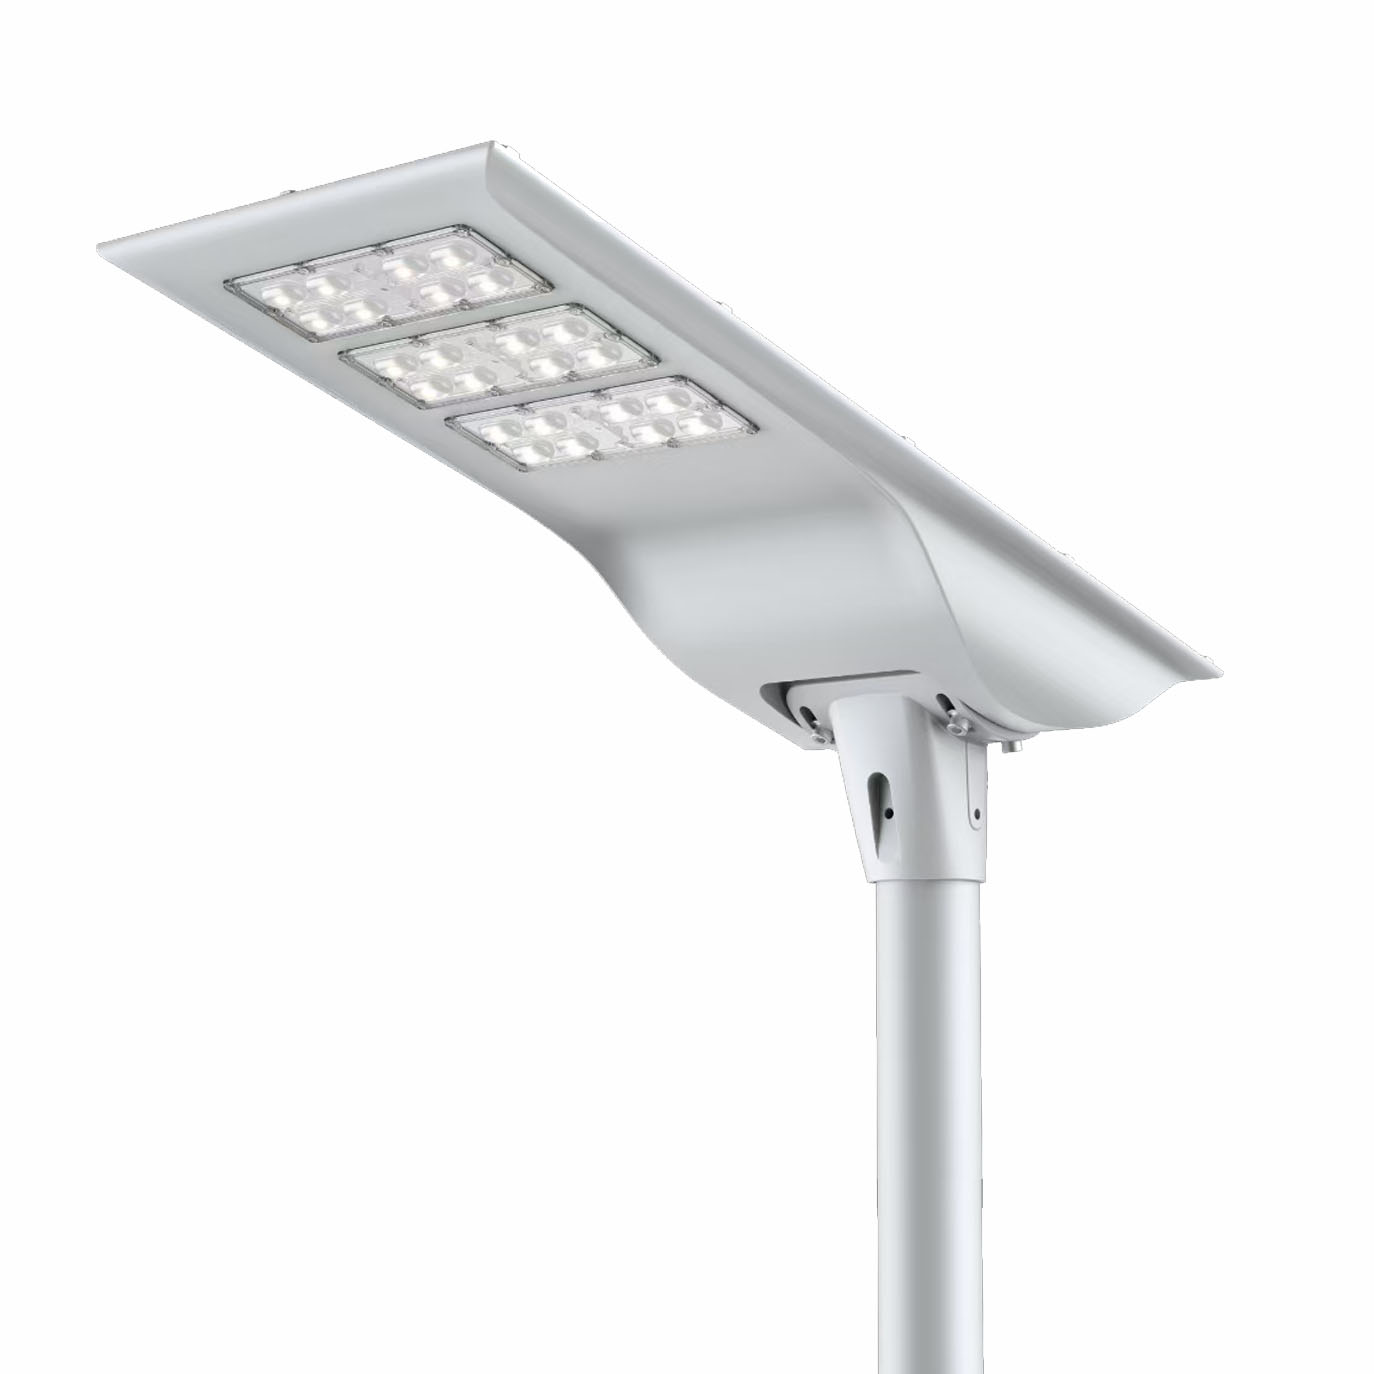 China 40W Commercial Led Integrated Solar Street Light With Lens